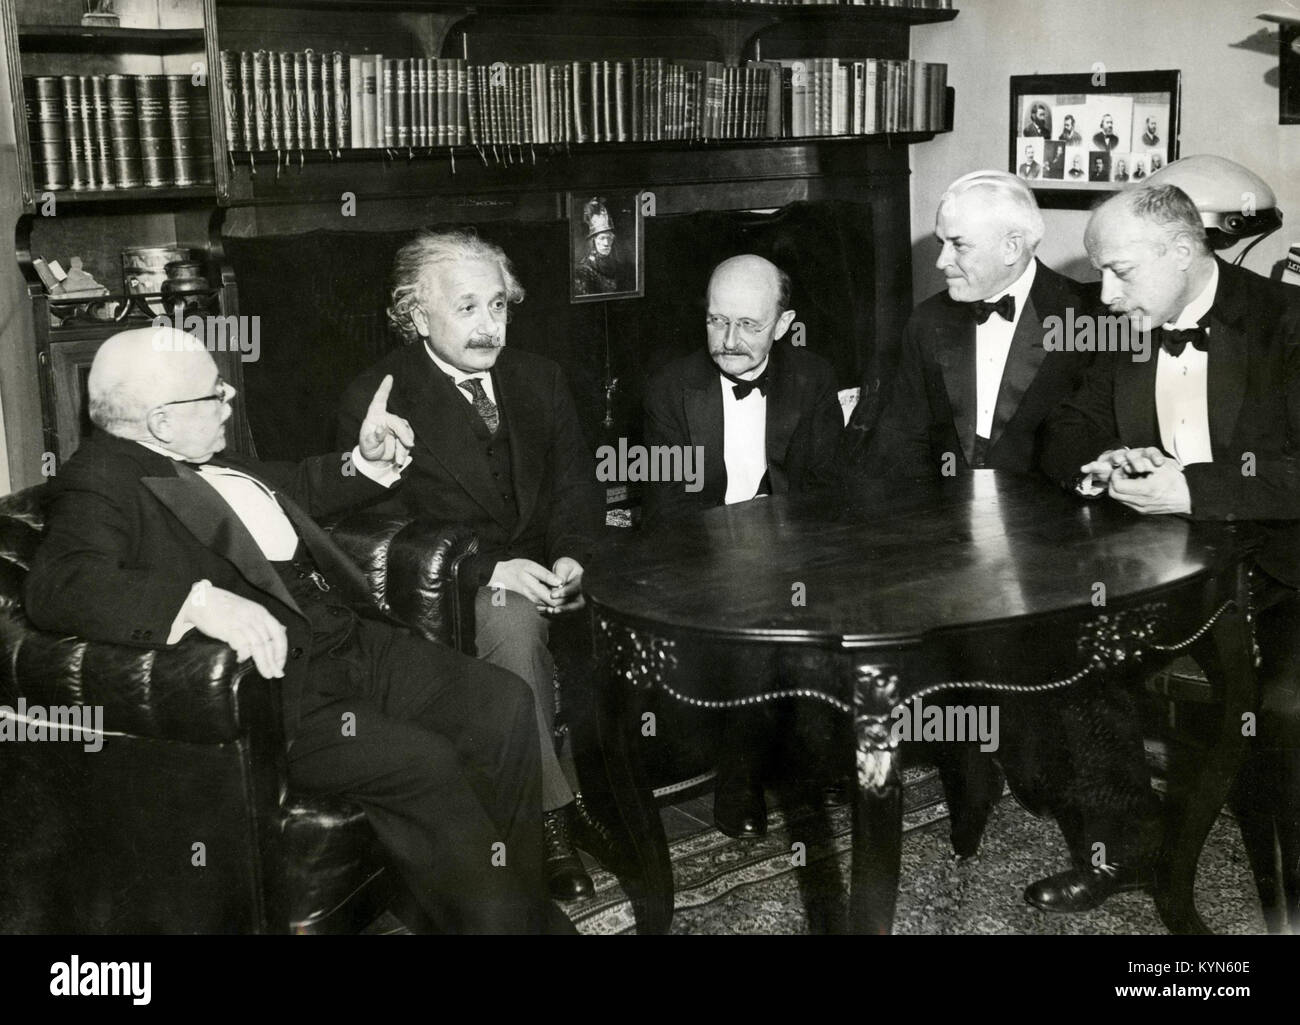 From left to right: Walther Nernst, Albert Einstein, Max Planck, Robert Andrews Millikan and Max von Laue at a dinner given by von Laue in Berlin on 11 November 1931 Stock Photo